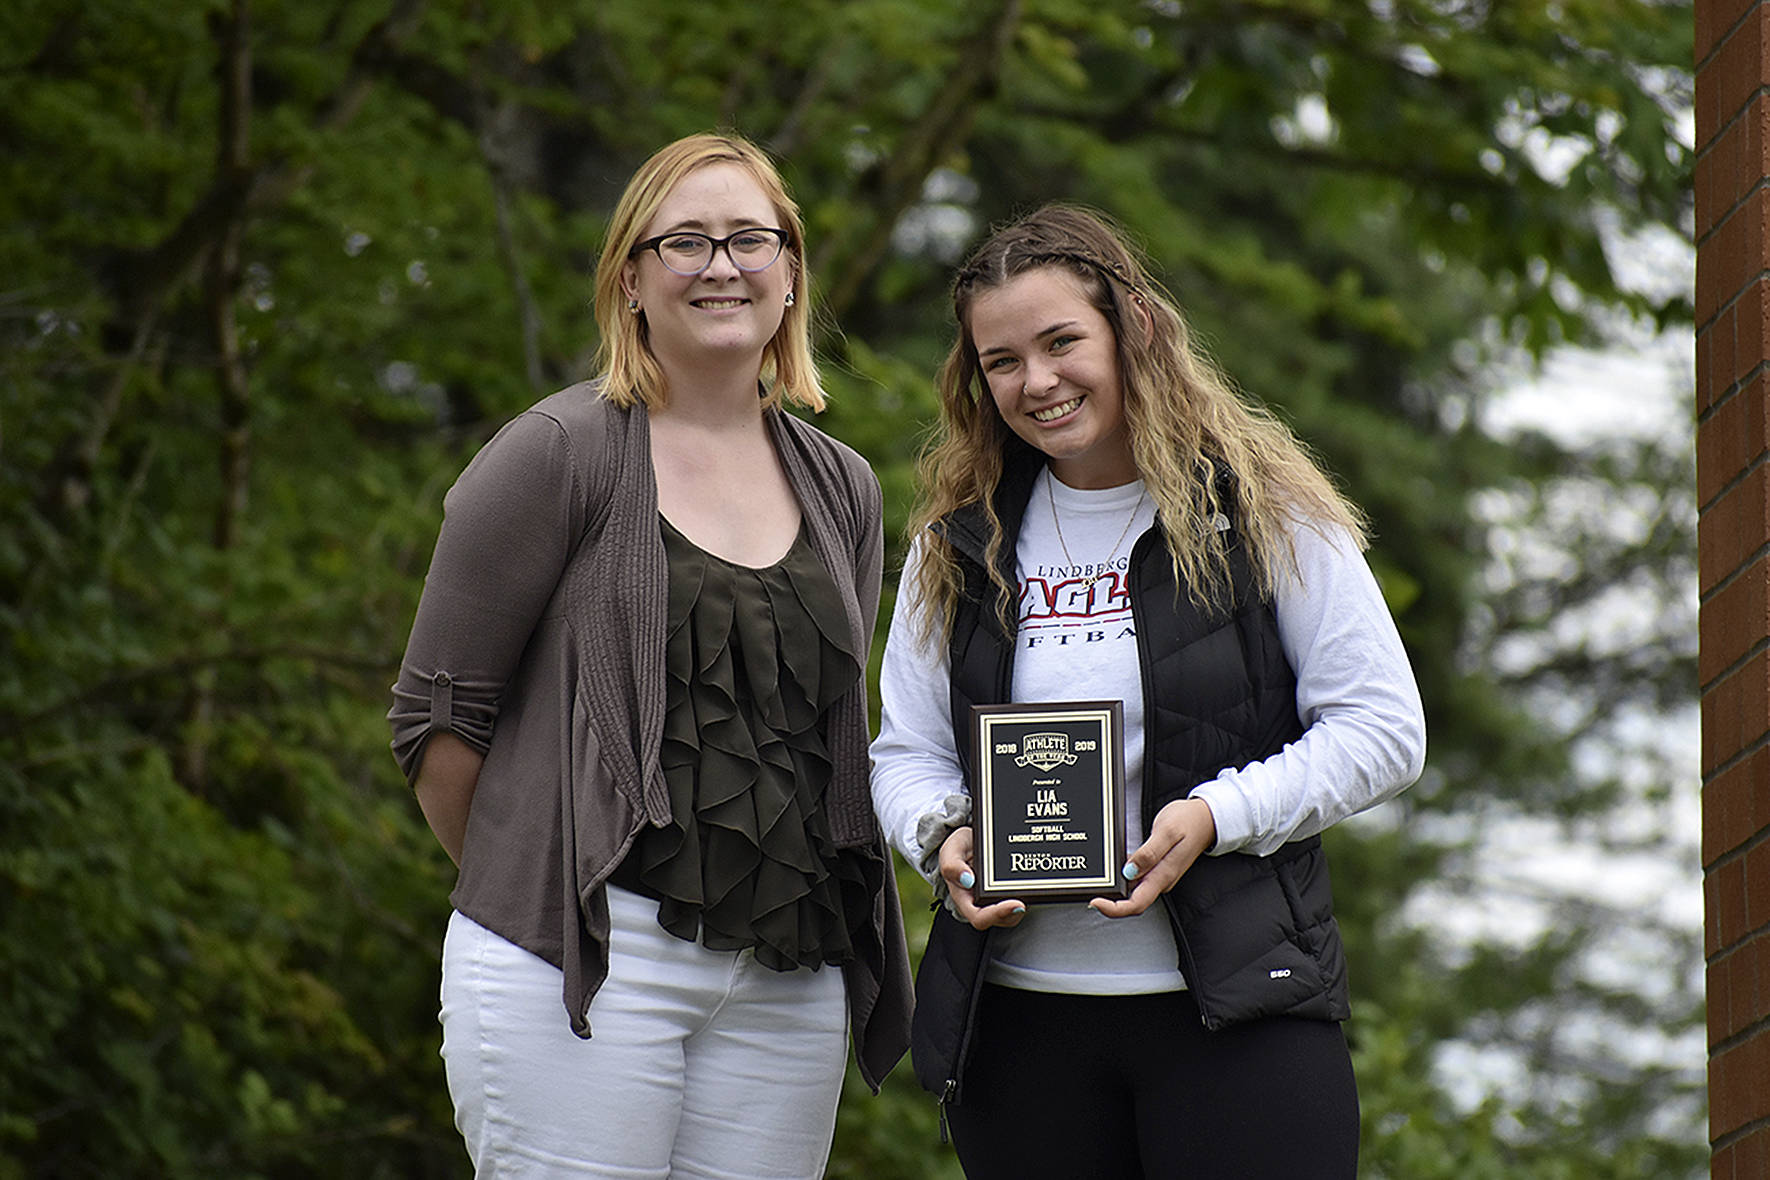 The first ever Female Athlete of the Year for the Renton Reporter, Lia Evans (right) is awarded a plague from the Renton Reporter’s editor Danielle Chastaine (left).                                Photo by Haley Ausbun